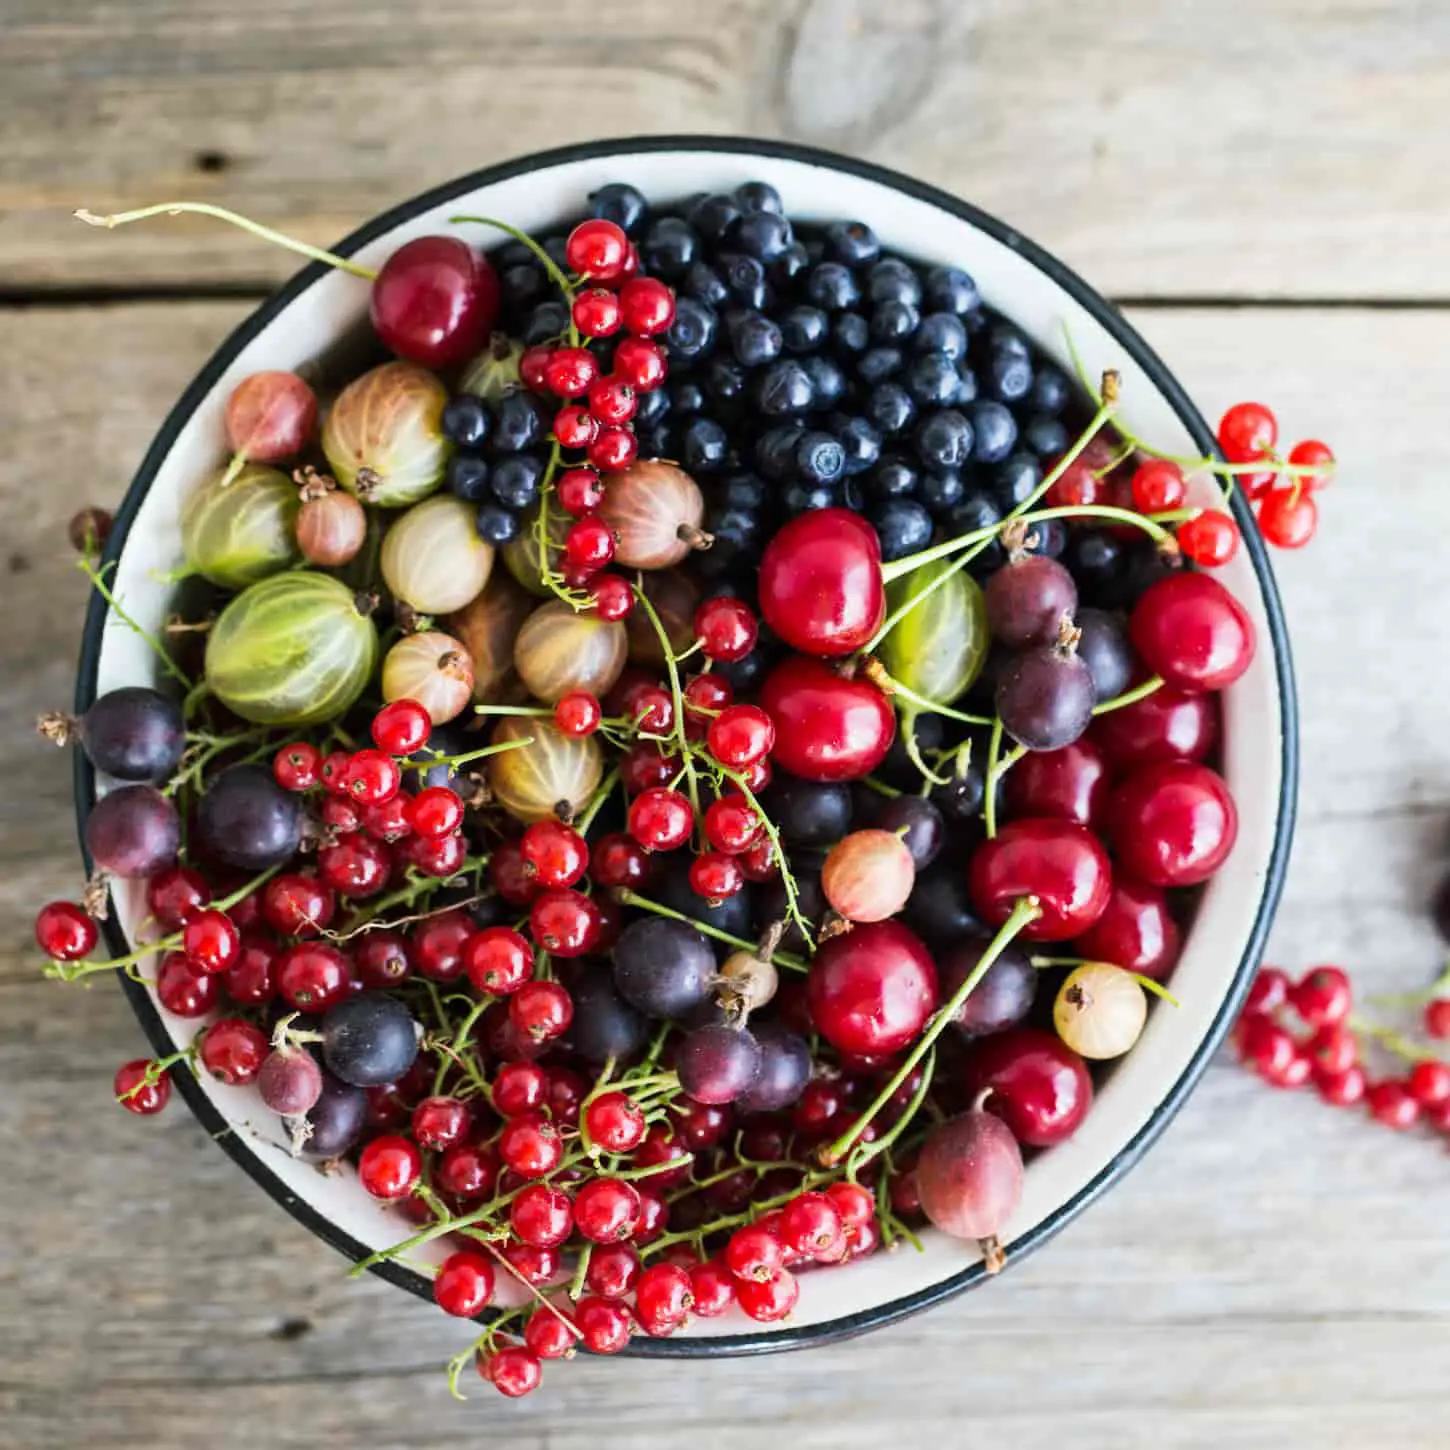 Freeze Drying Berries: How-to and FAQs Answered